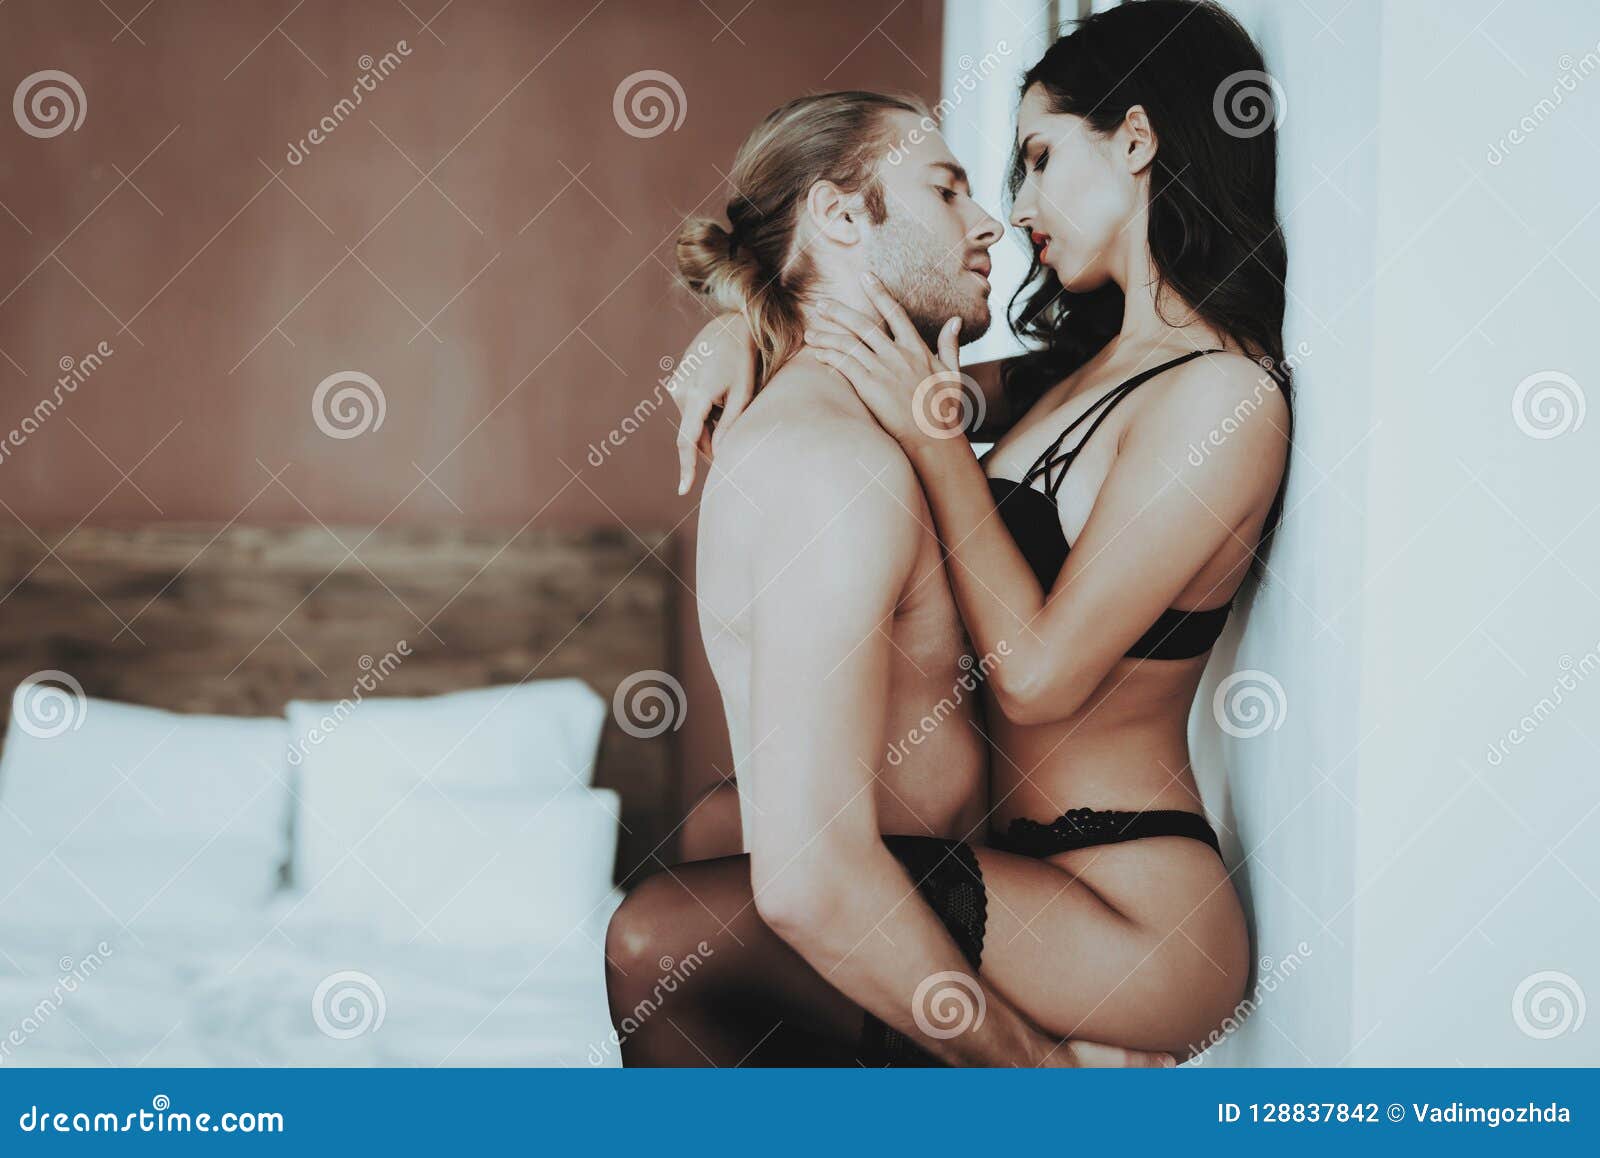 Passionate Man Holding Woman in Lingerie Near Wall Stock Photo pic image